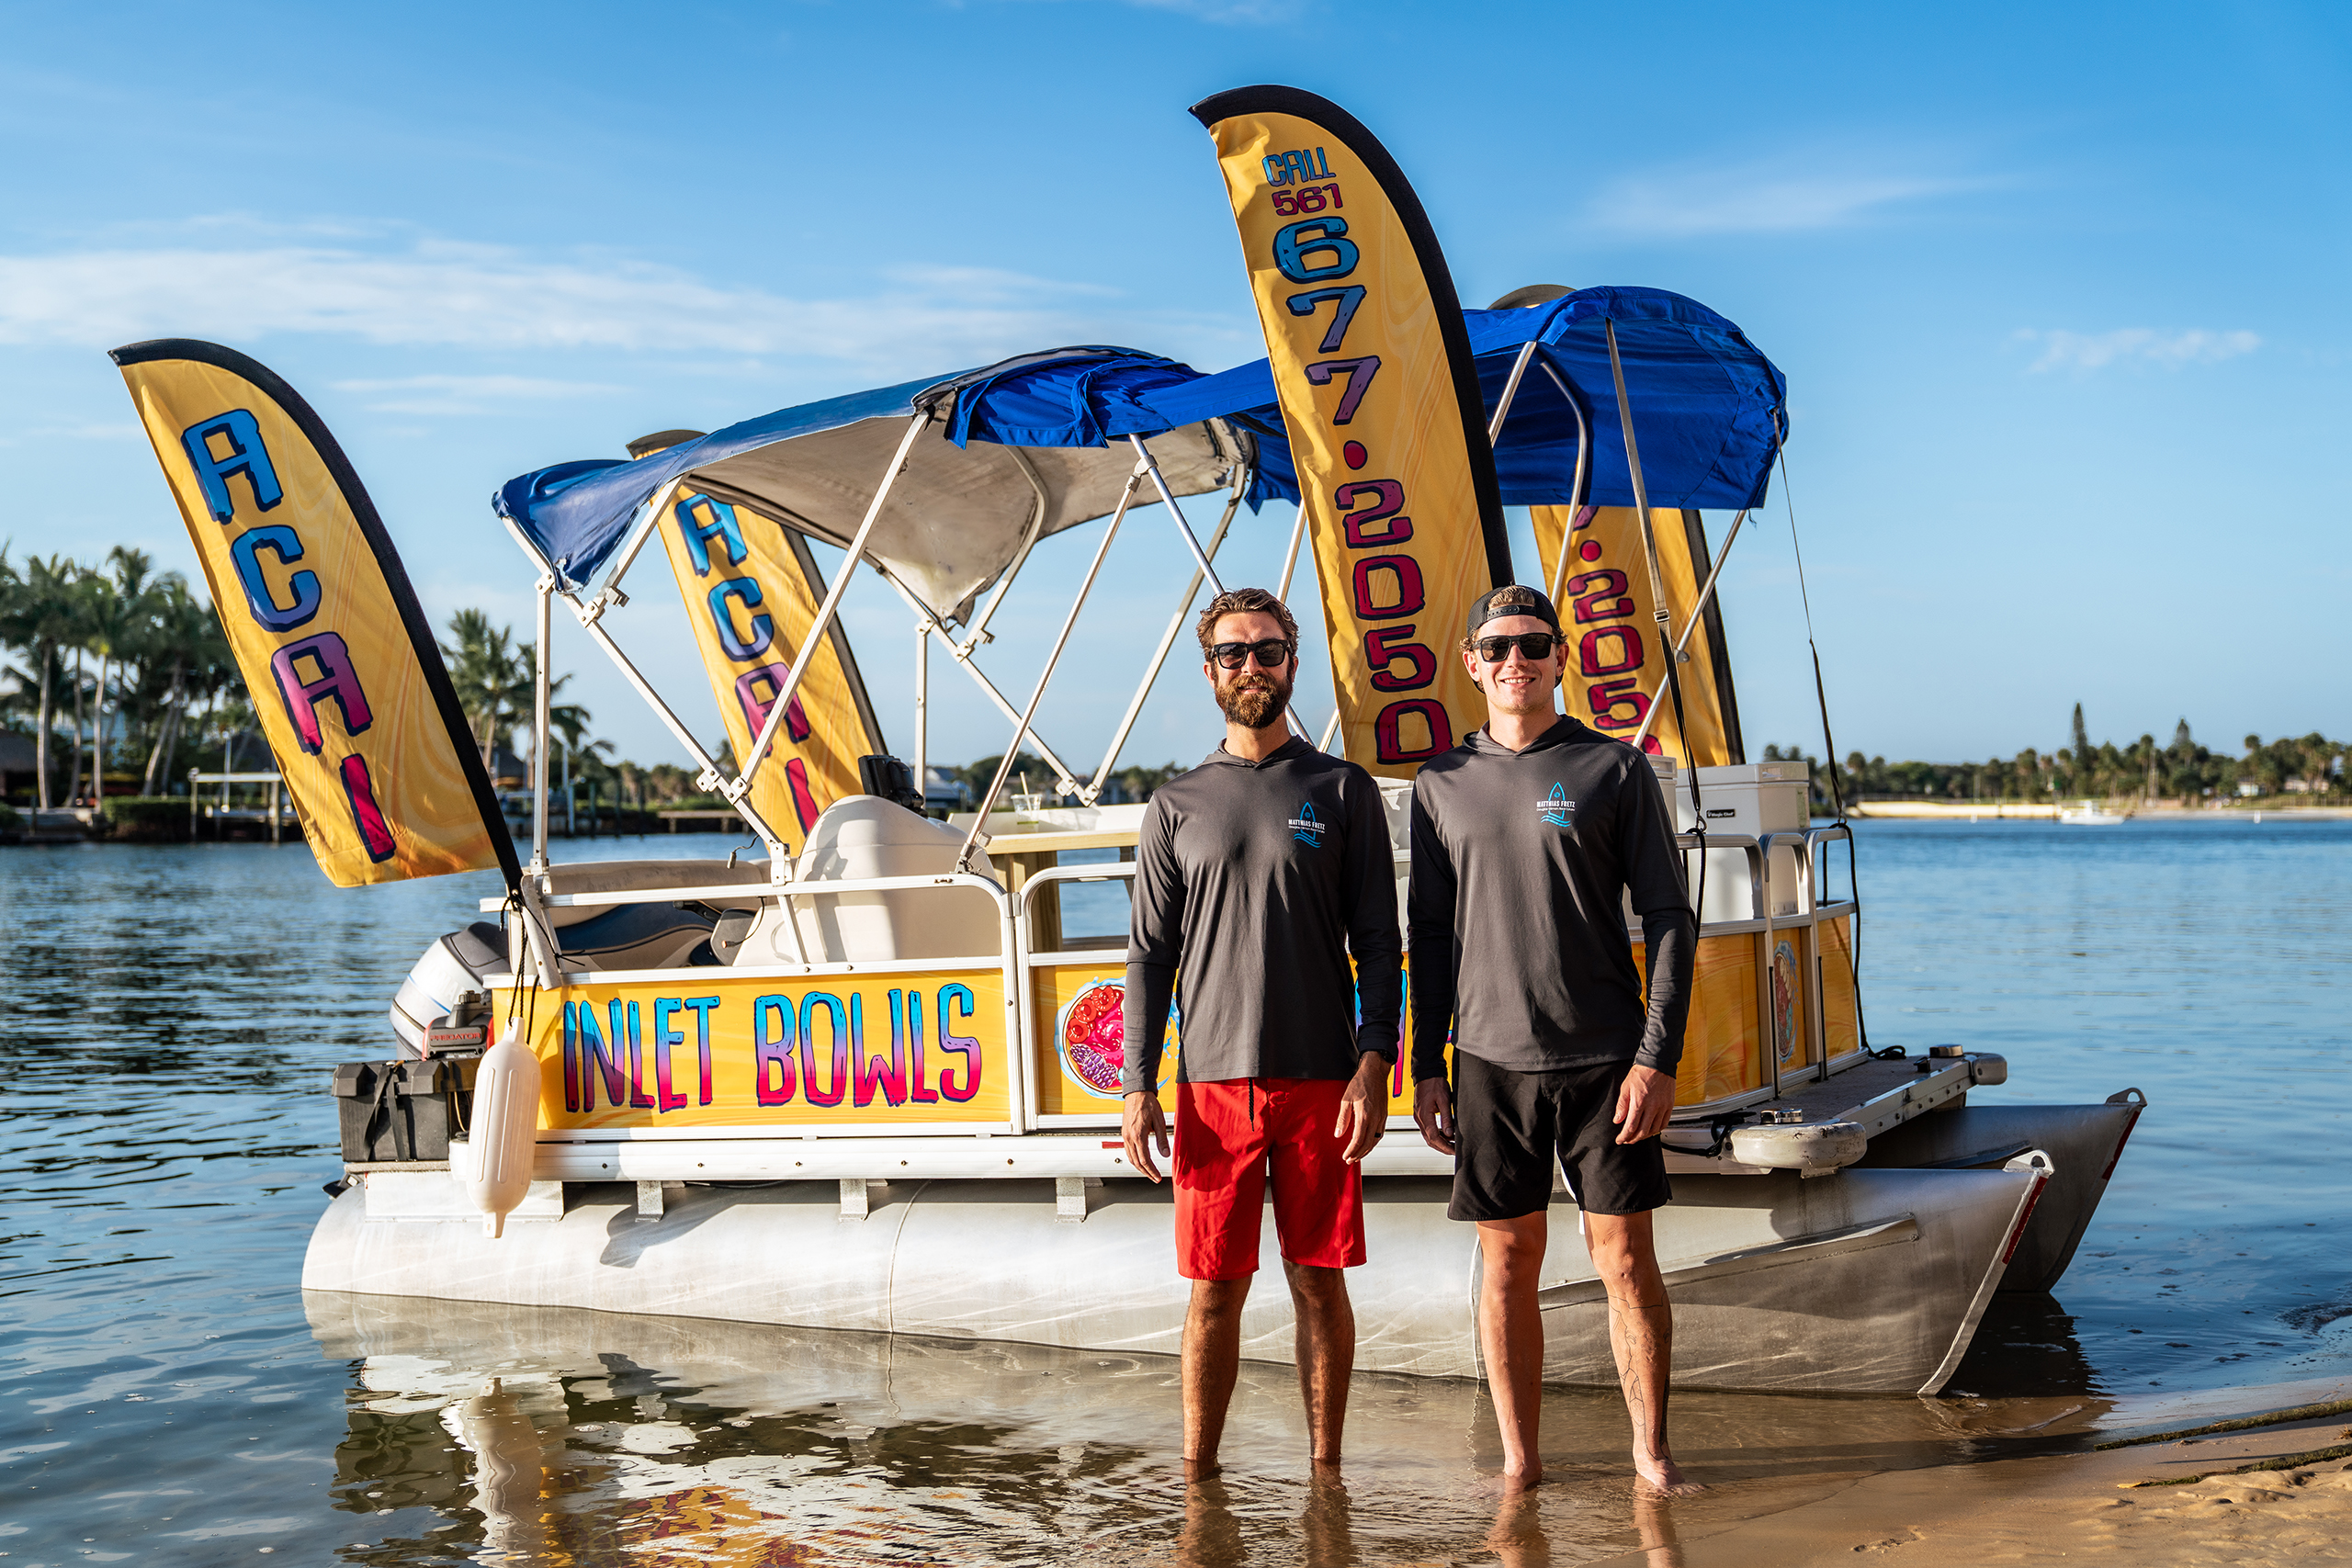 Inlet Bowls Co-owners Matthias Fretz and Ethan Jaudas. Serving acai bowls on the water.